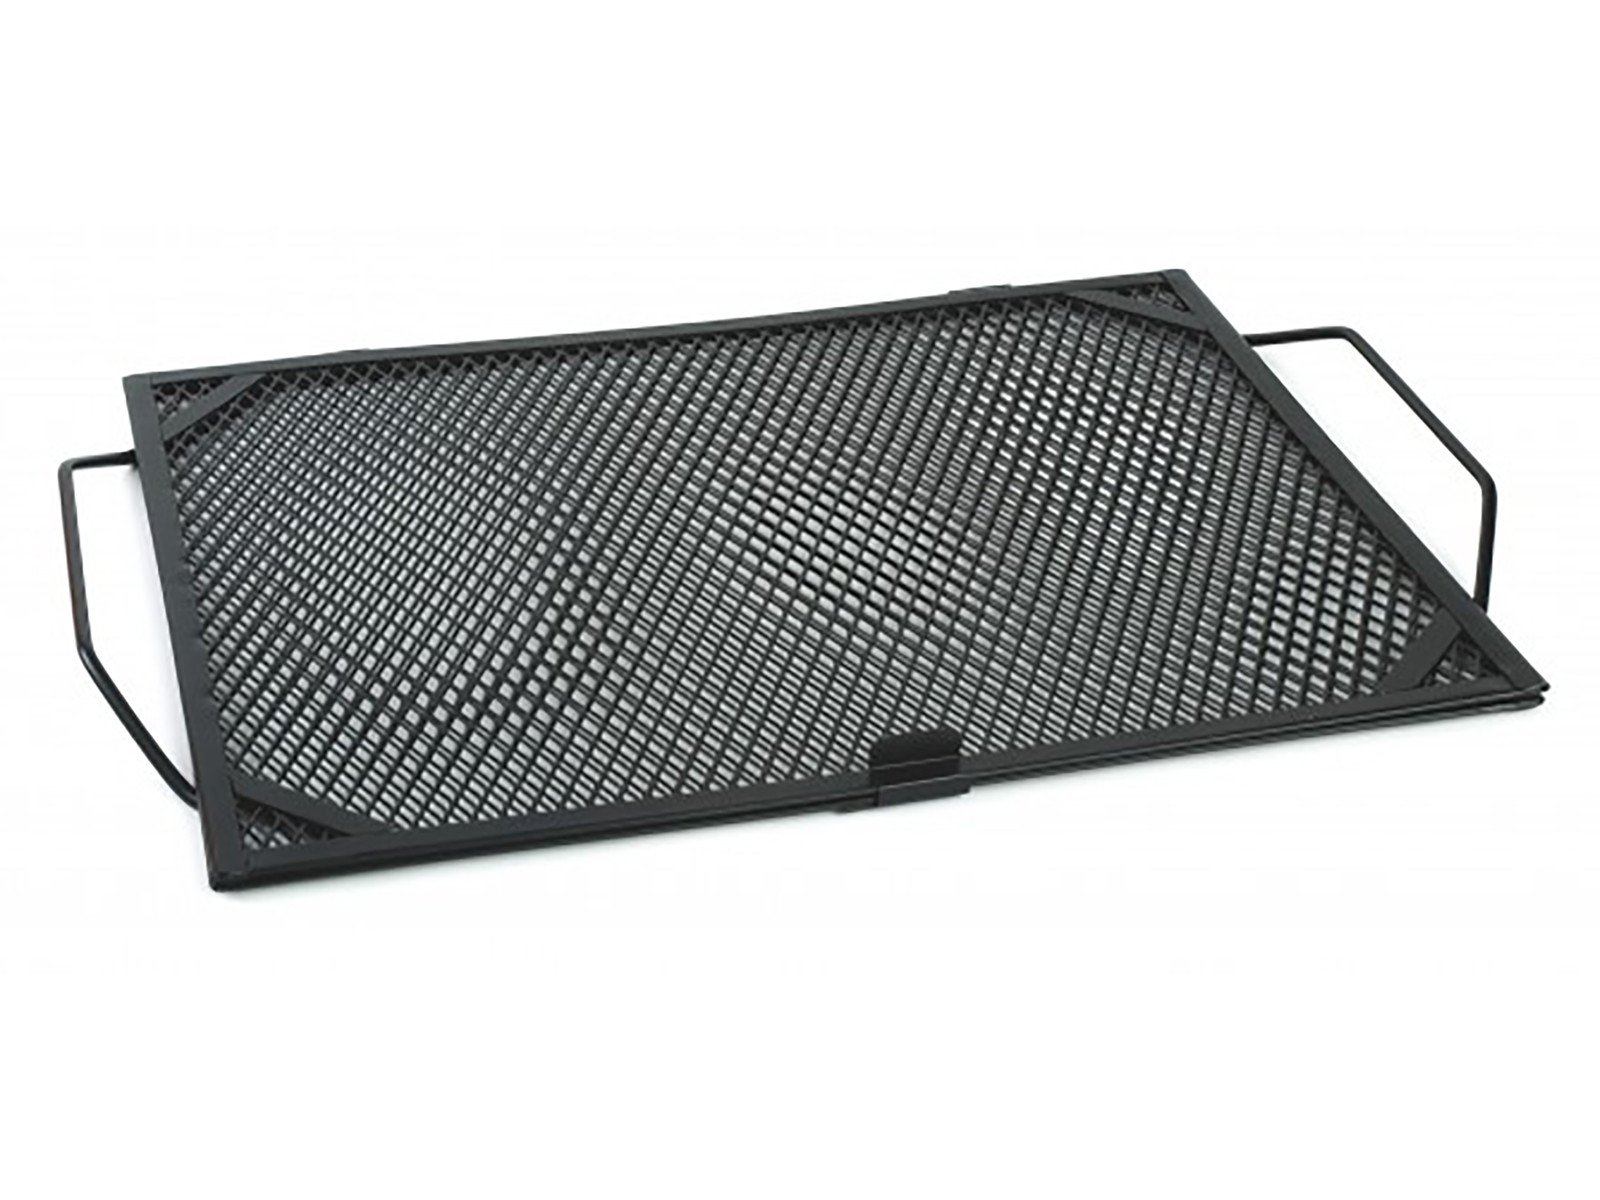 NEW Charcoal Companion Stainless Steel Grilling Grid  CC3102 FREE SHIPPING 